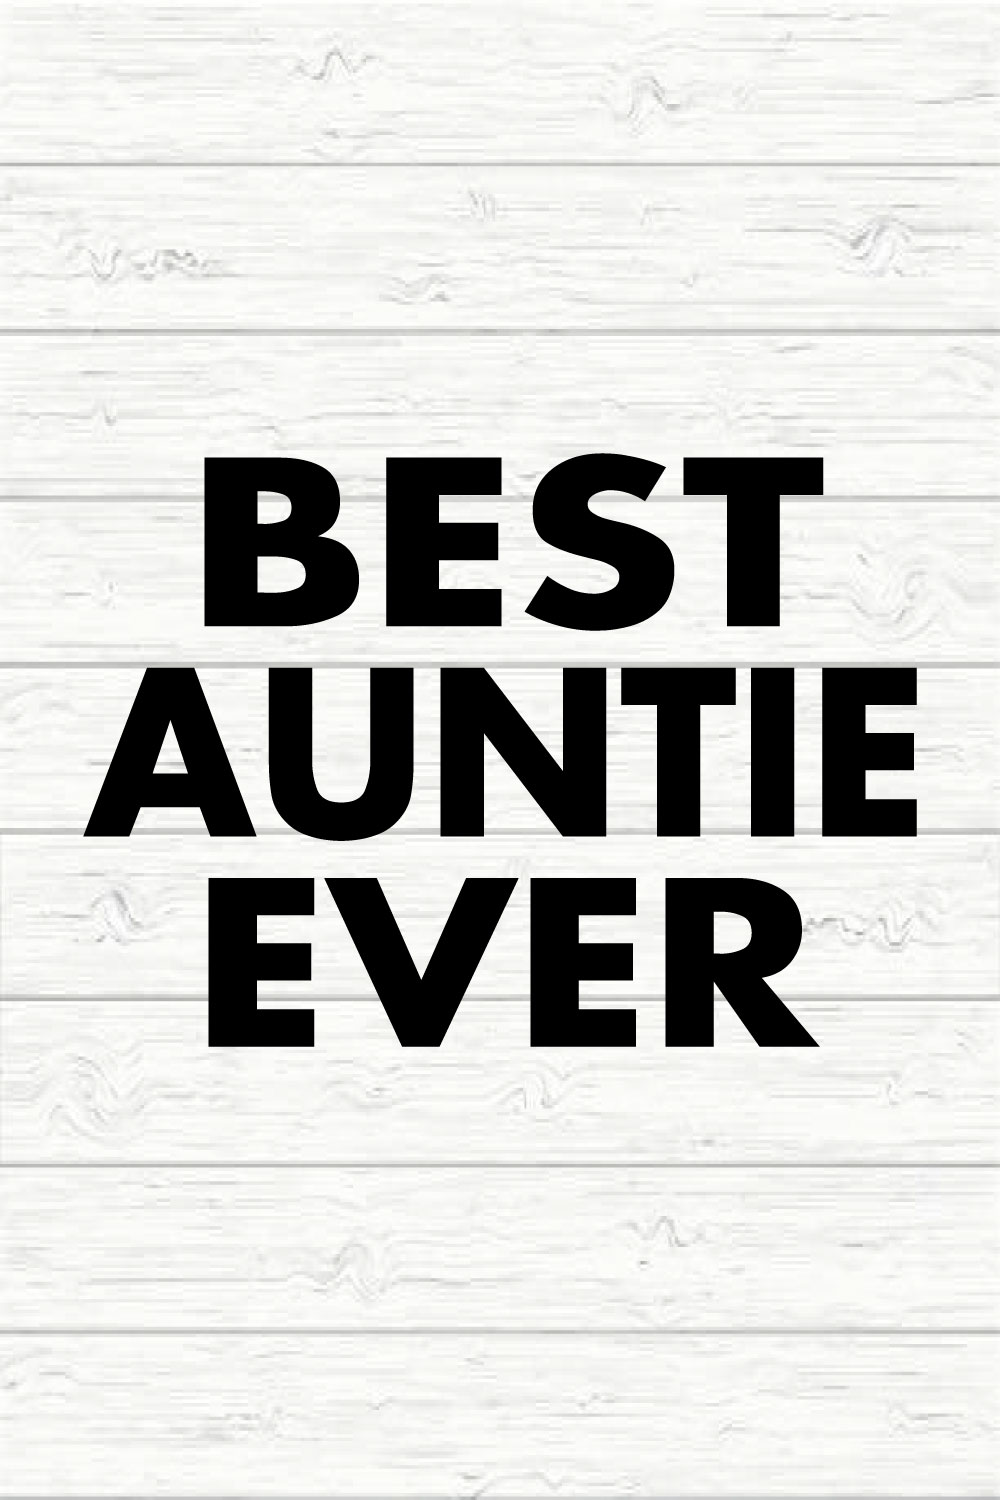 Best auntie ever pinterest preview image.